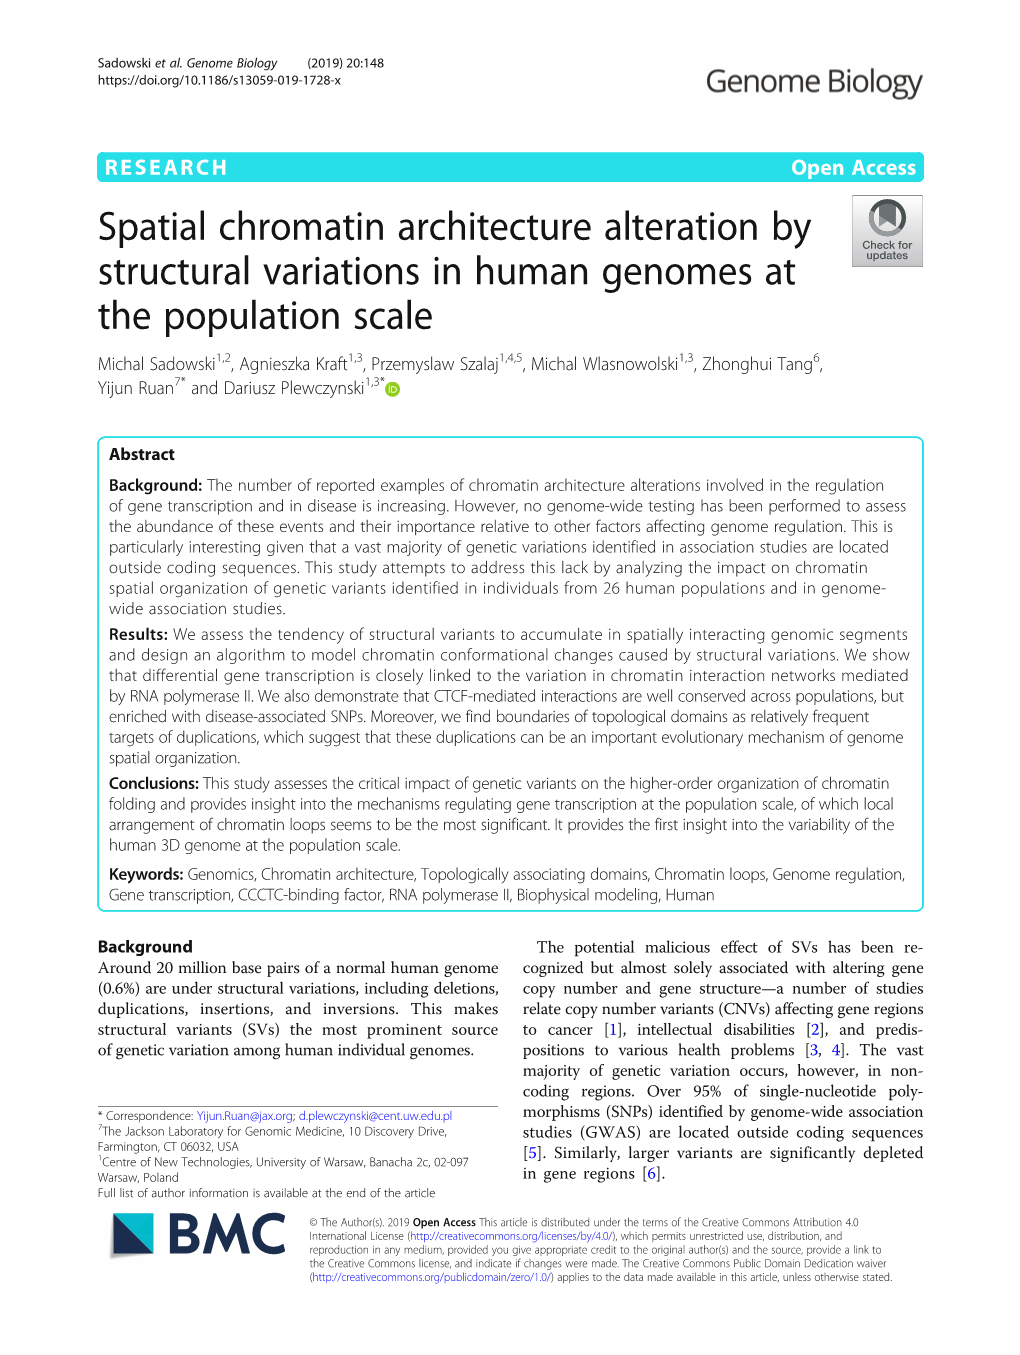 Spatial Chromatin Architecture Alteration By